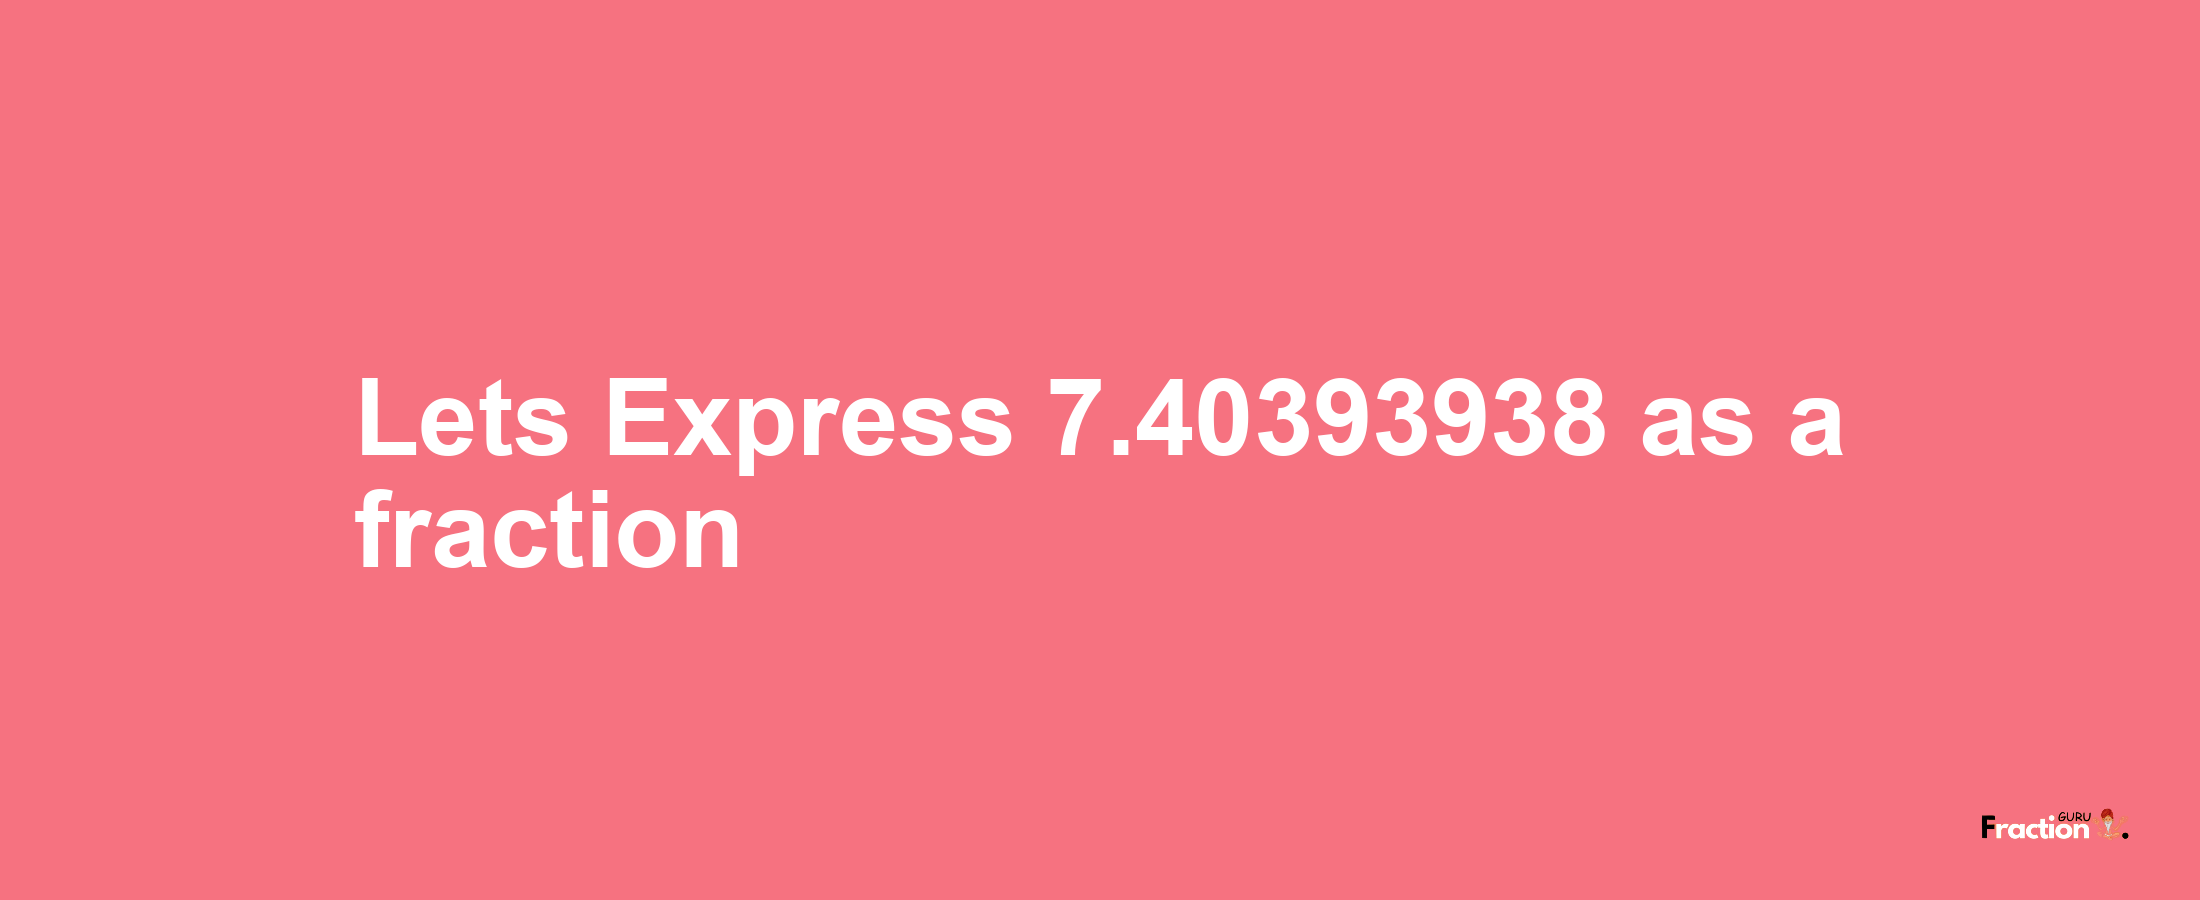 Lets Express 7.40393938 as afraction